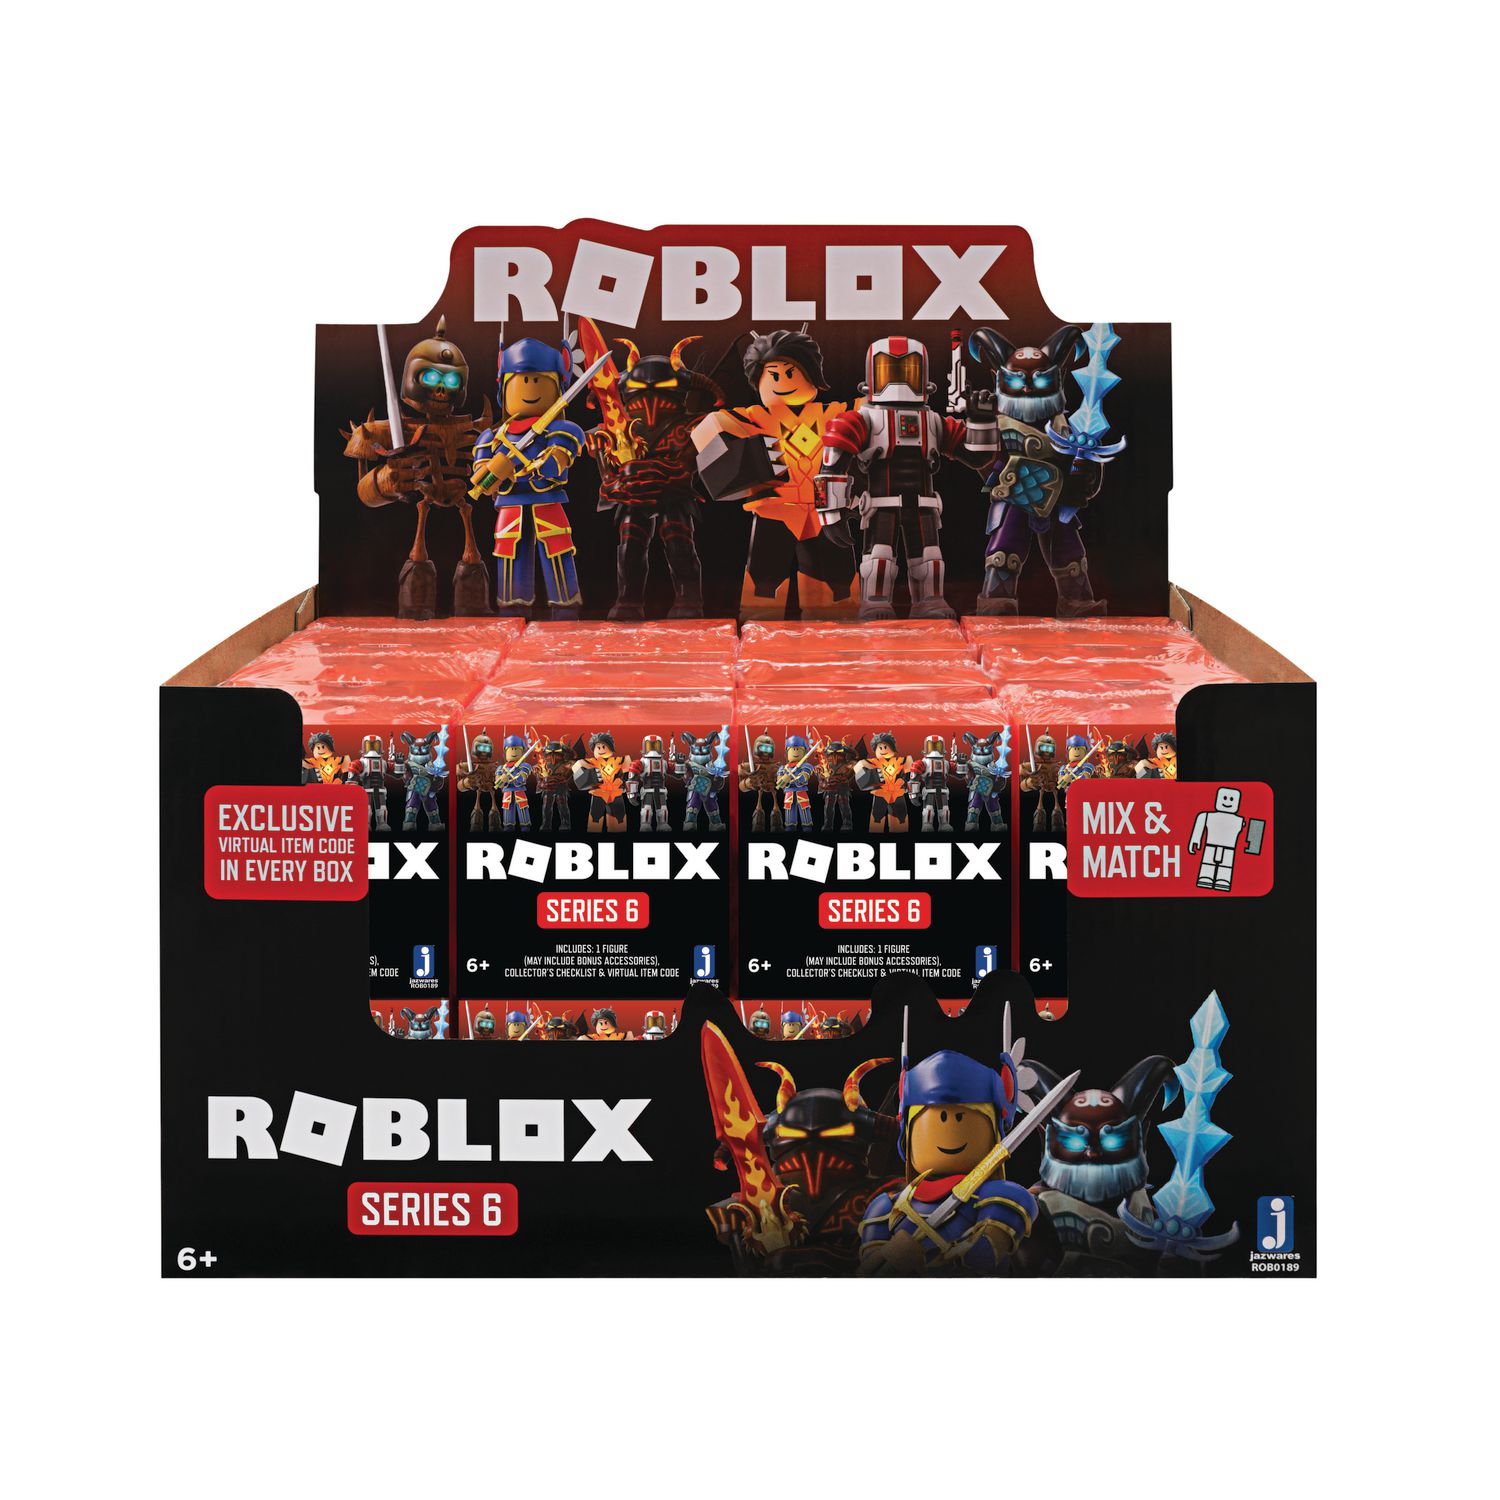 Tv Movie Video Games Jazwares With Virtual Item Captain Rampage New Roblox Series 1 Action Figure Toys Hobbies - action figures toys games roblox figures 6 piece set pvc game